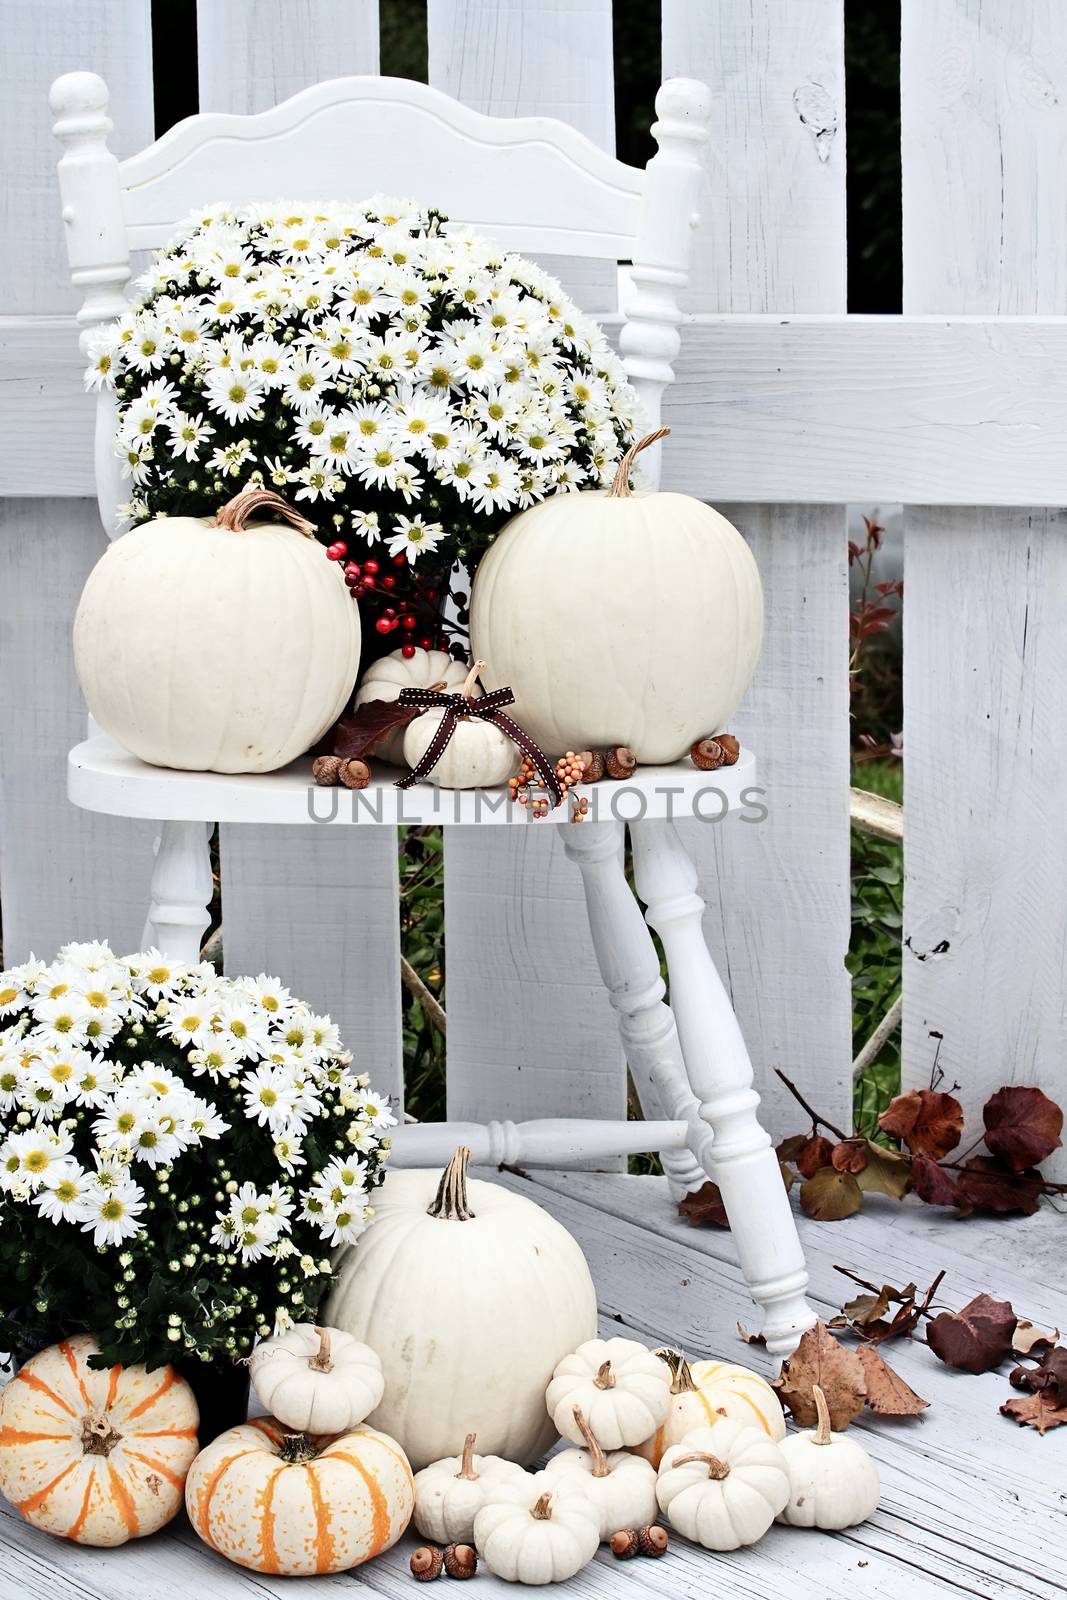 White Pumpkins and Mums by StephanieFrey